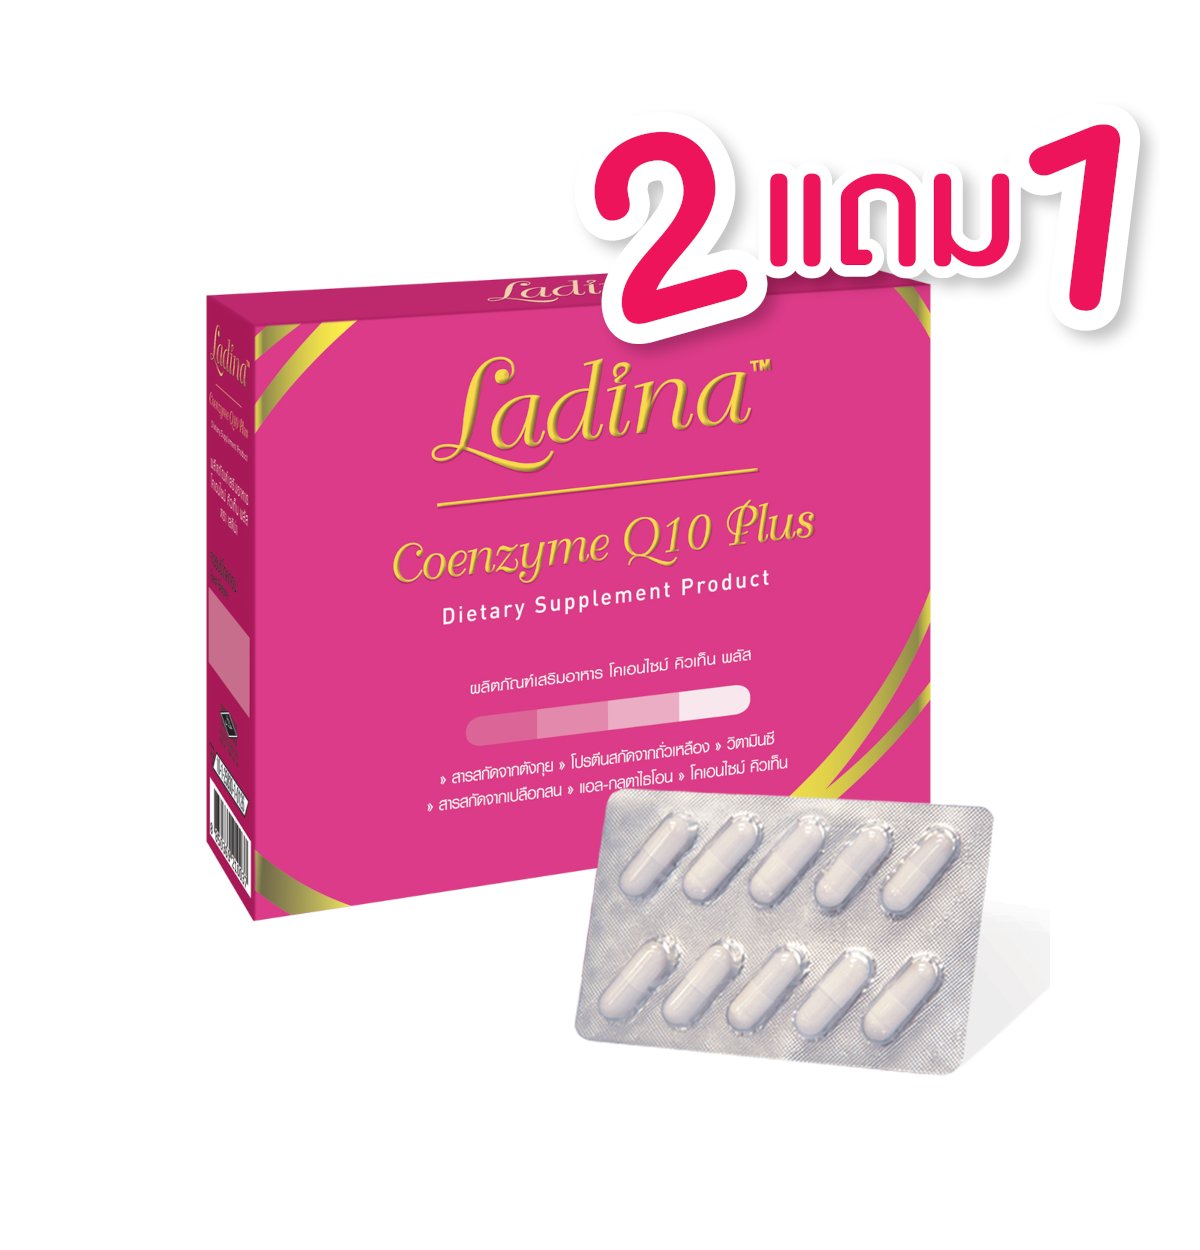 [Buy2Get1] LADINA Coenzyme Q10 Plus Dietary Supplement Prouduct